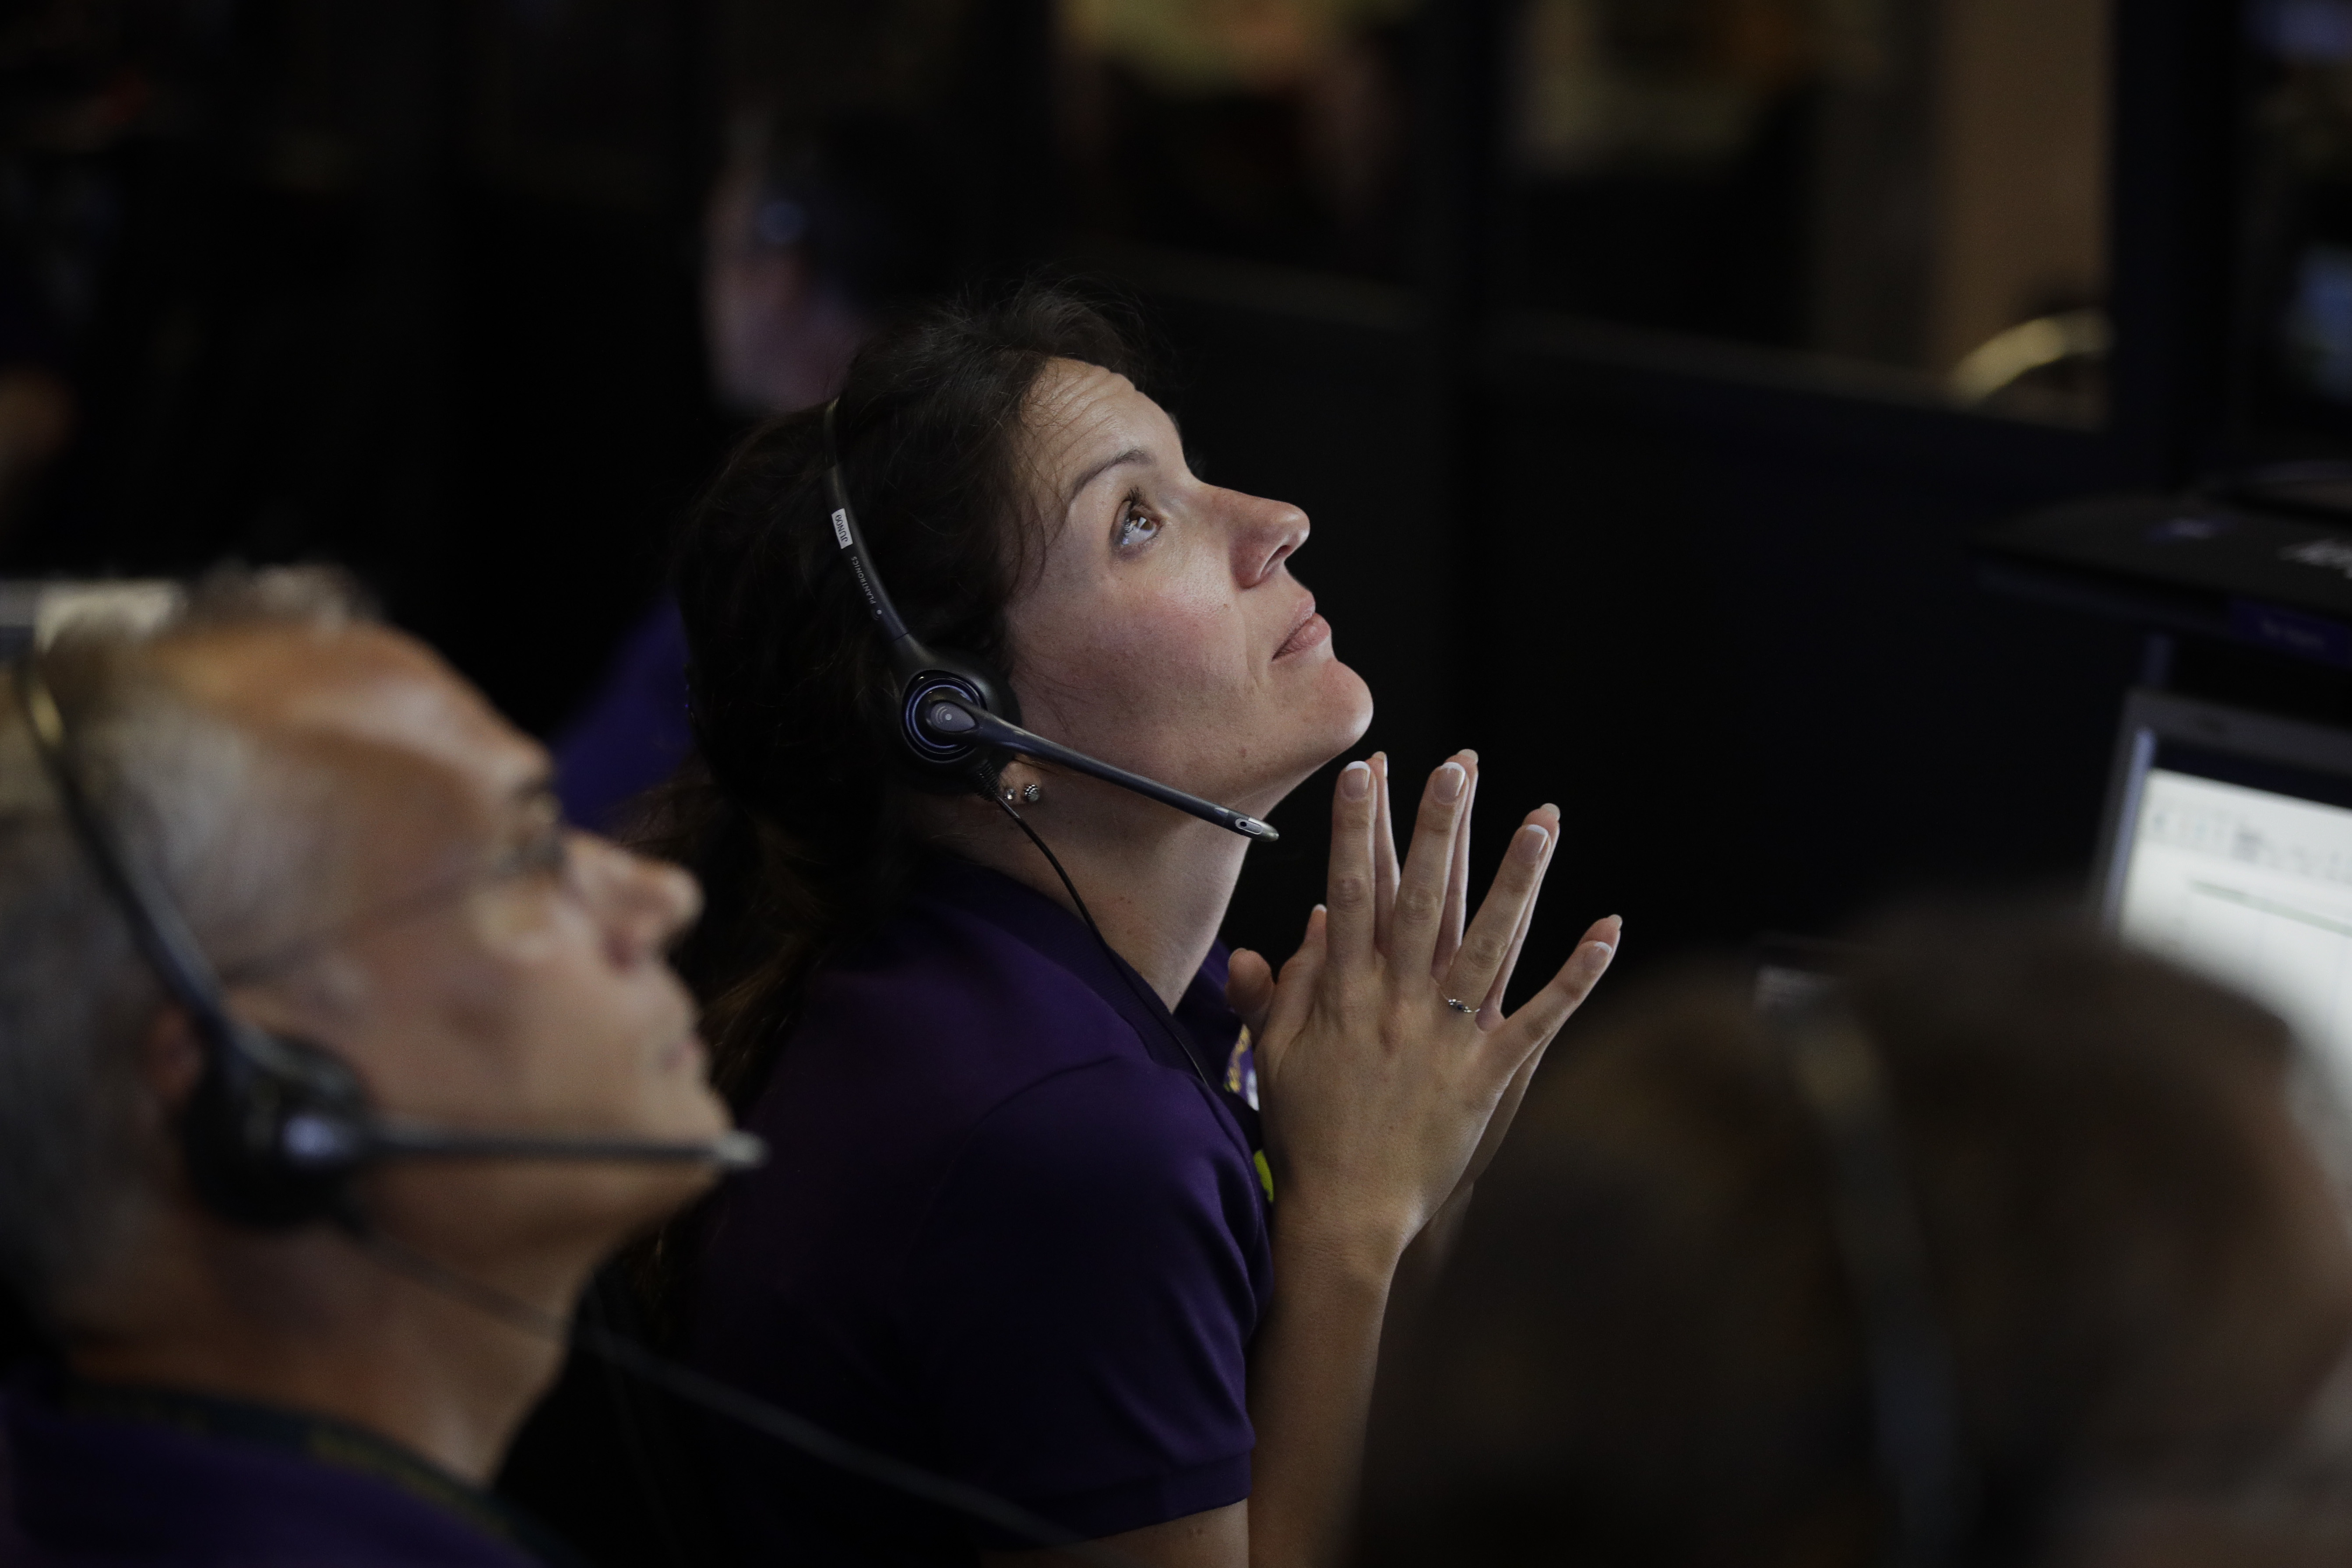 Engineer Mar Vaquero monitors the status of NASA's Cassini spacecraft as it enters the atmosphere of Saturn in mission control at NASA's Jet Propulsion Laboratory, Friday, Sept. 15, 2017, in Pasadena, Calif. Cassini disintegrated in the skies above Saturn early Friday, following a remarkable journey of 20 years. (AP Photo/Jae C. Hong, Pool)